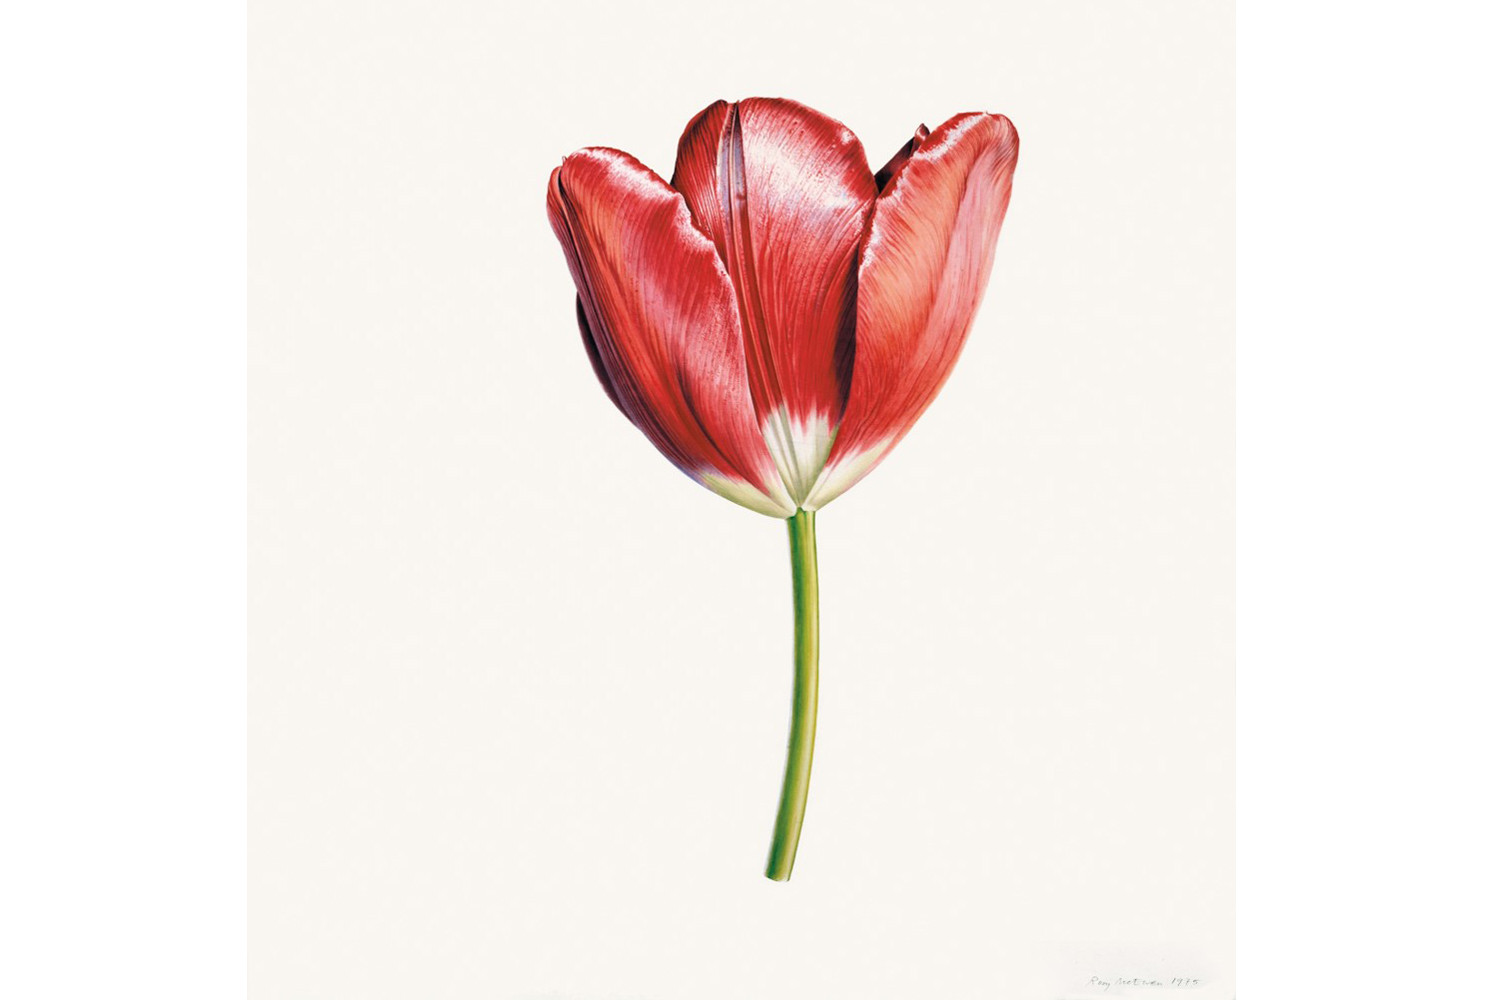 Tulip ‘Helen Josephine’, 1975, by Rory McEwen (Scottish, 1932 – 1982). Watercolor on vellum, 29.75 x 26.25 inches. On loan courtesy of the Estate of Rory McEwen. ©2023 Estate of Rory McEwen